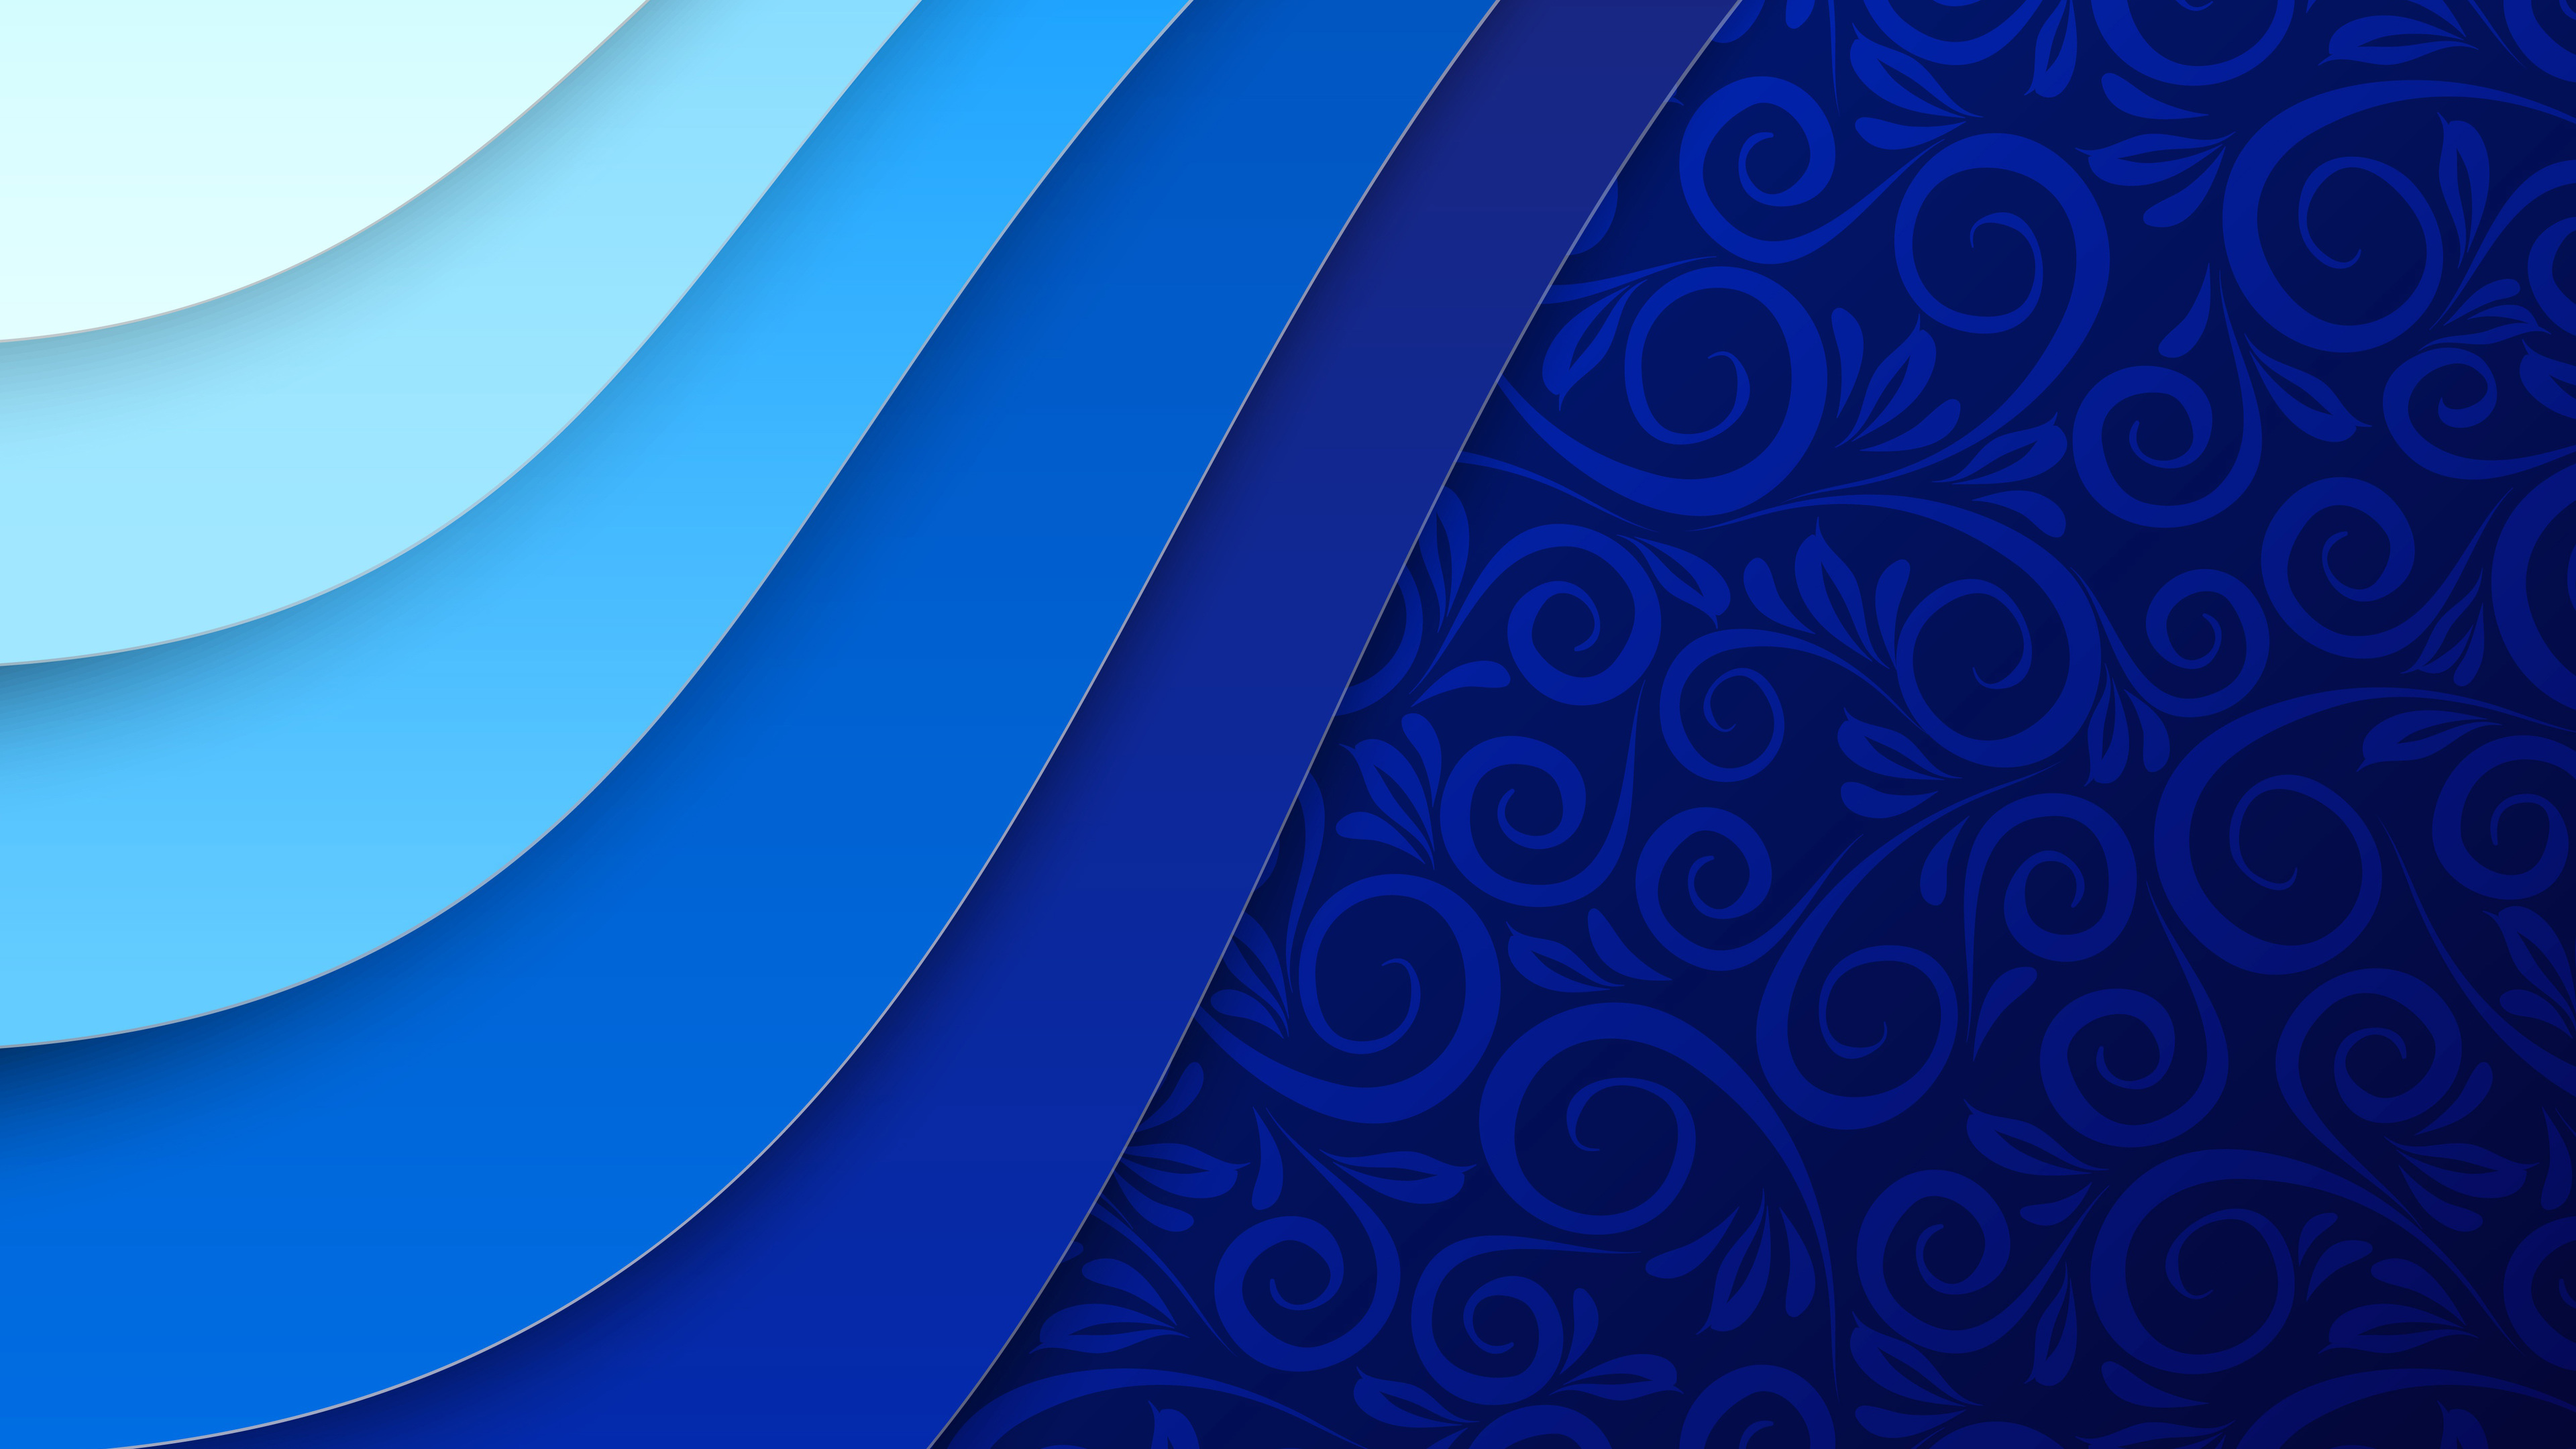 Free download Wallpaper 4k Abstract Blue Texture 5k 4k wallpapers 5k  wallpapers [3840x2160] for your Desktop, Mobile & Tablet | Explore 30+ 4k  Blue Wallpapers | Blue Backgrounds, Backgrounds Blue, Blue Wallpapers